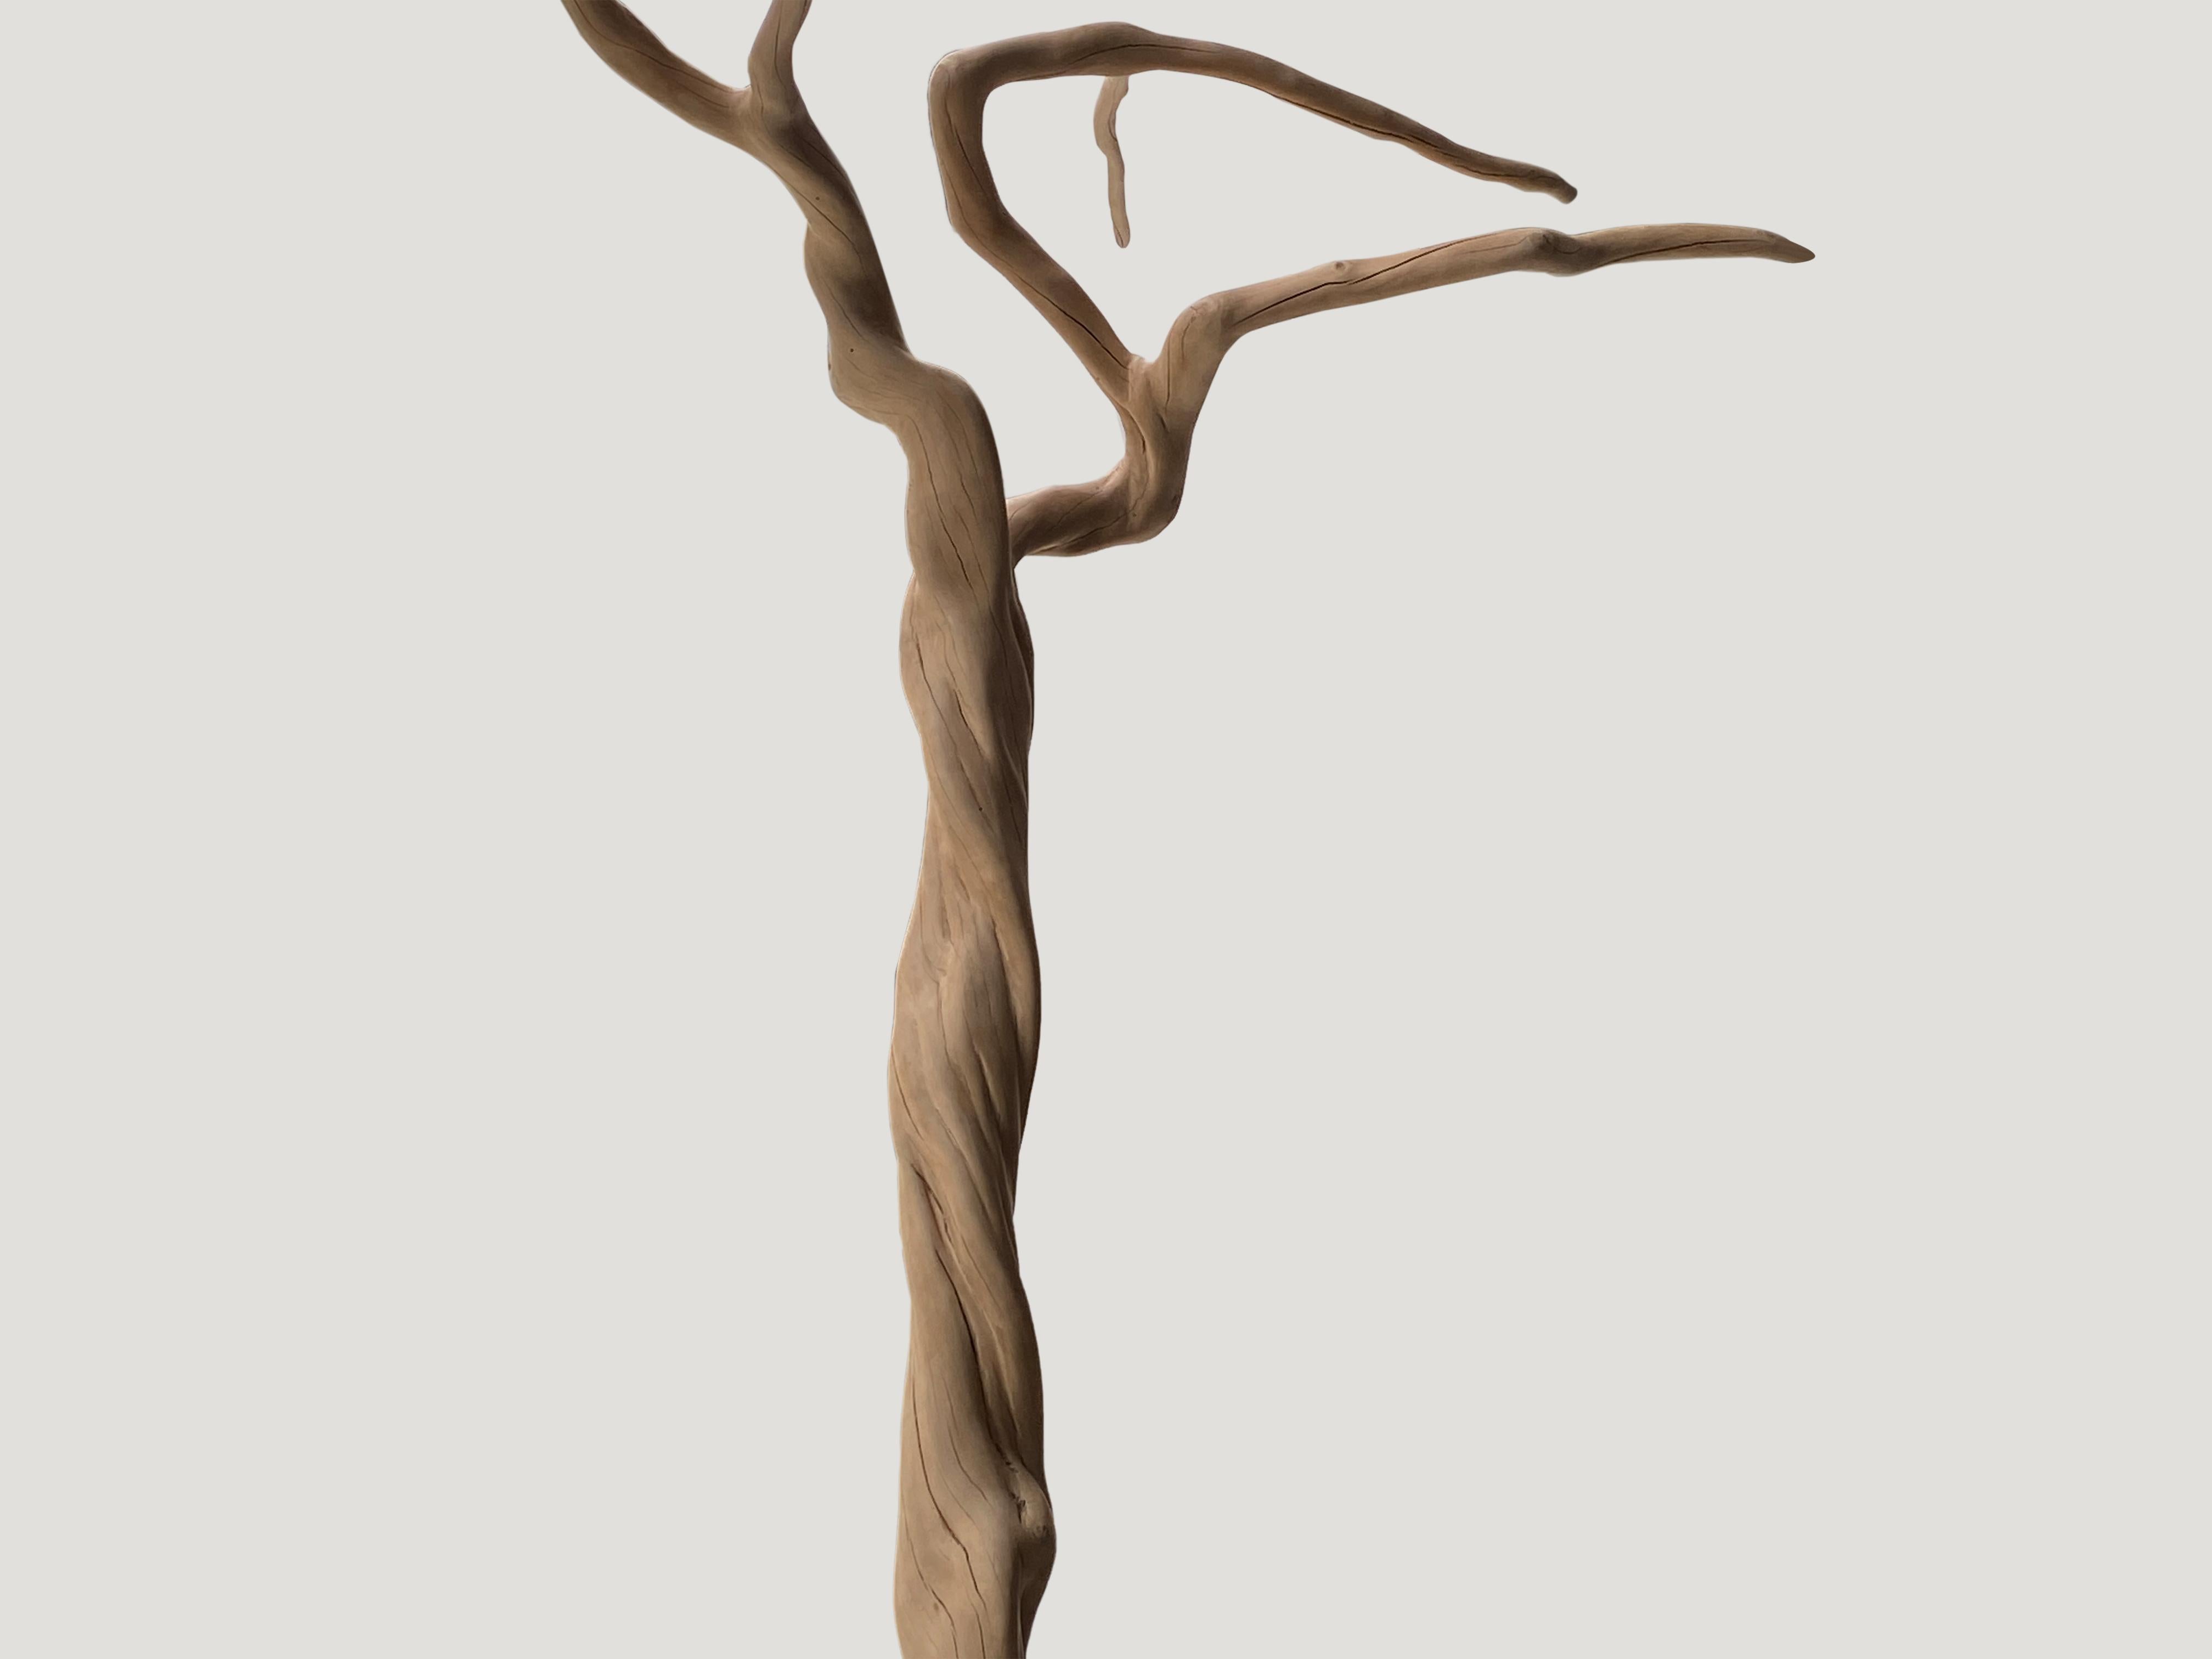 Coffee tree sculpture. Bleached, sanded and set on a modern black steel base.

Andrianna Shamaris. The Leader In Modern Organic Design.